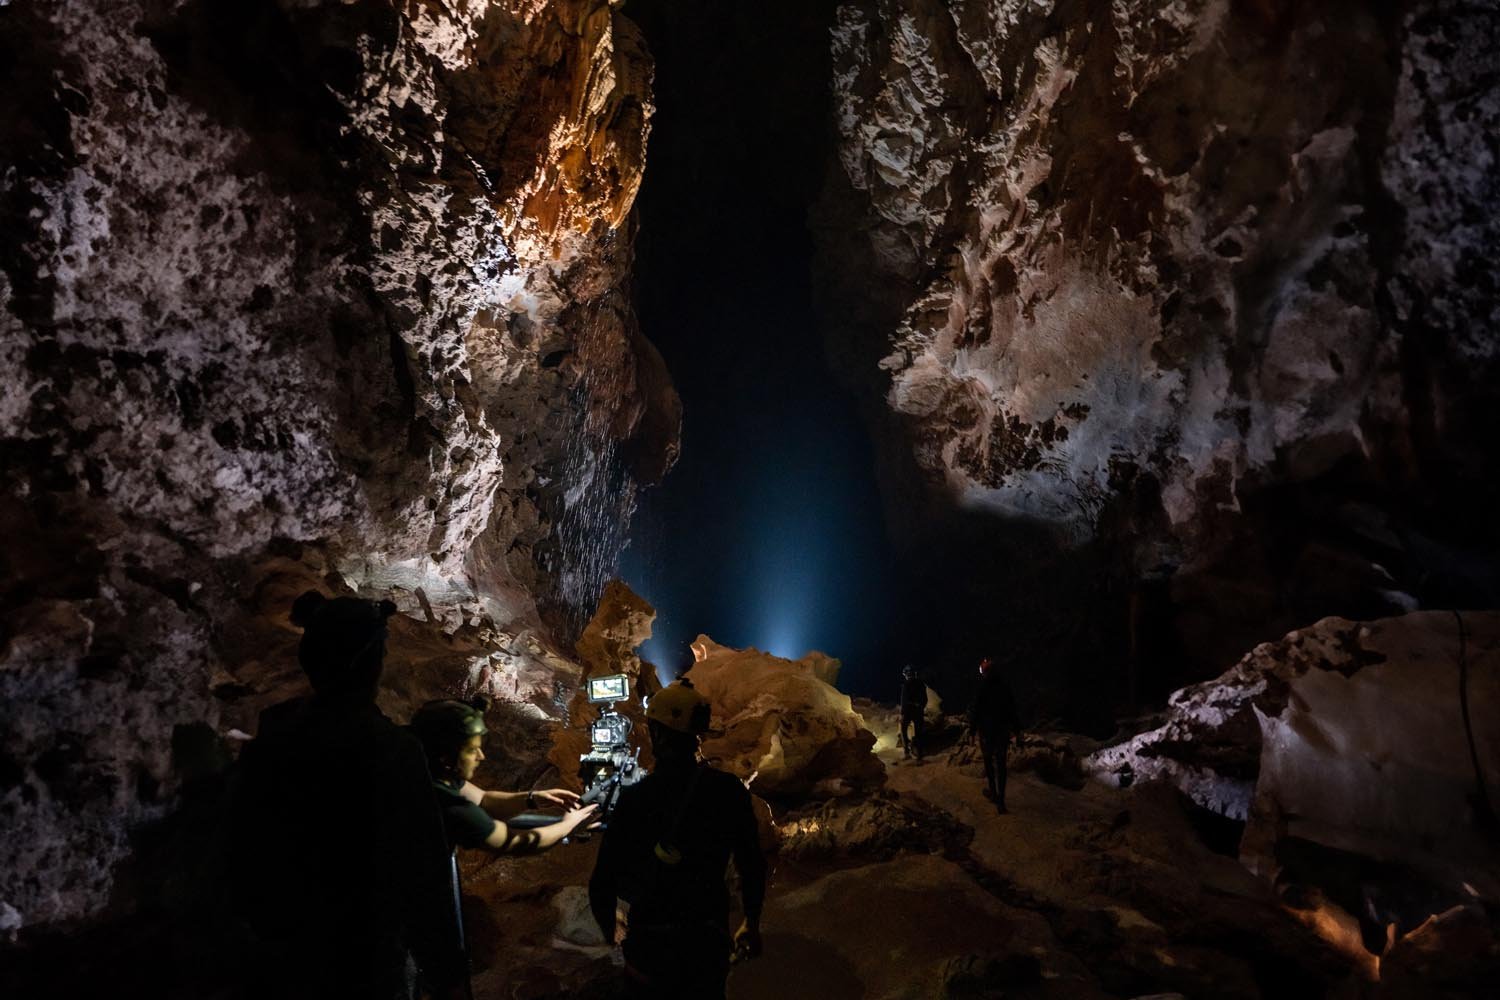 The crew captured the spectacle of water droplets falling from the cracks within the cave.